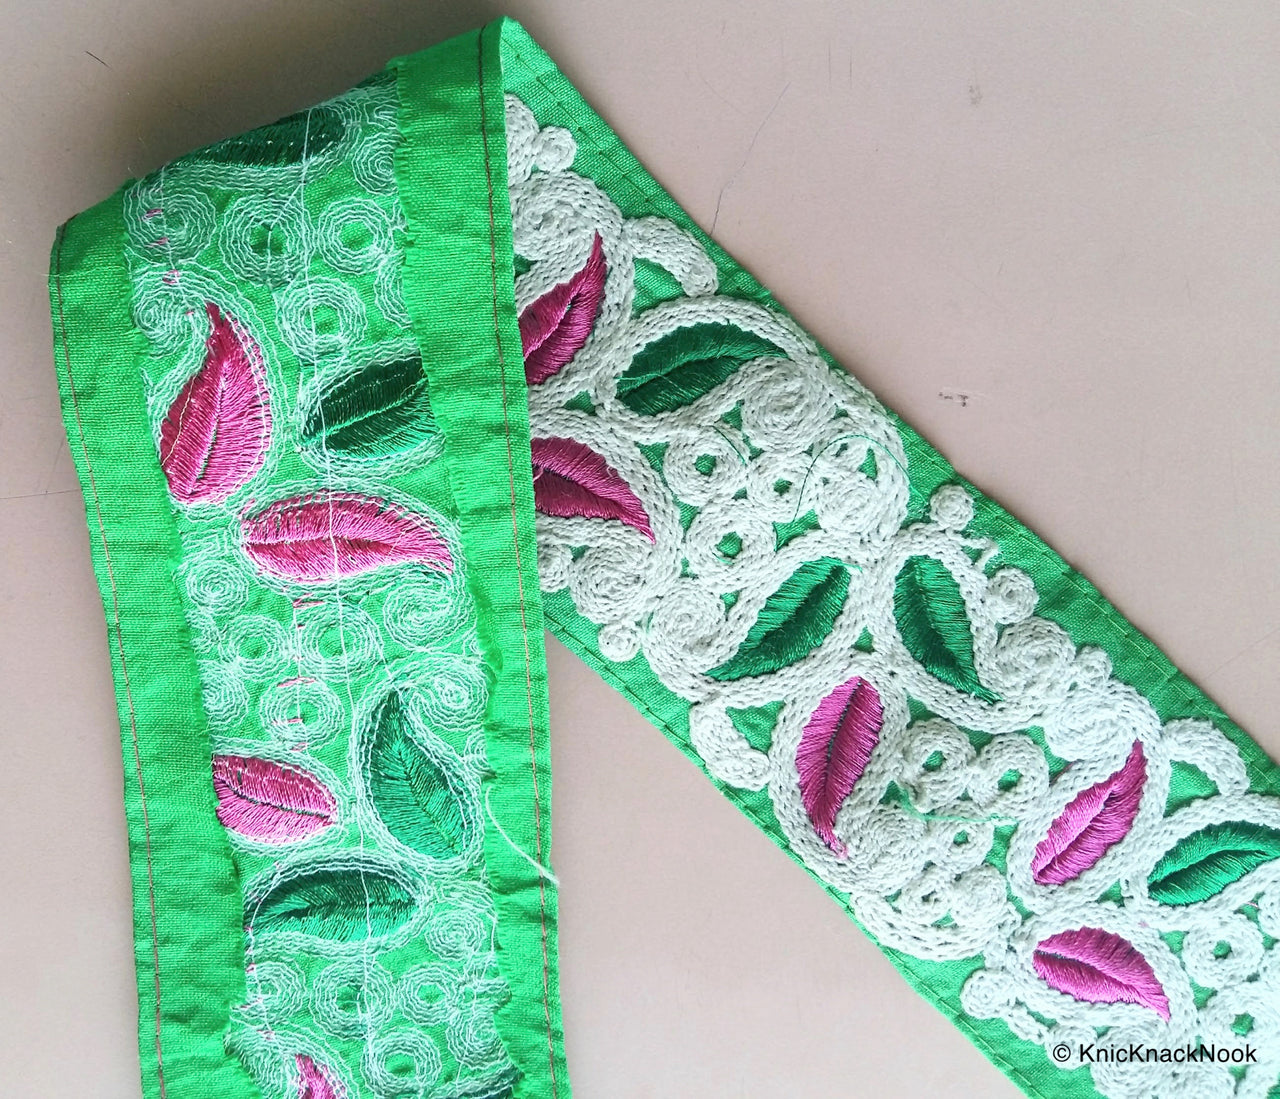 Green / Blue Fabric Trim With Off White, Pink And Green Embroidery, 75mm wide - 200317L520/21Trim